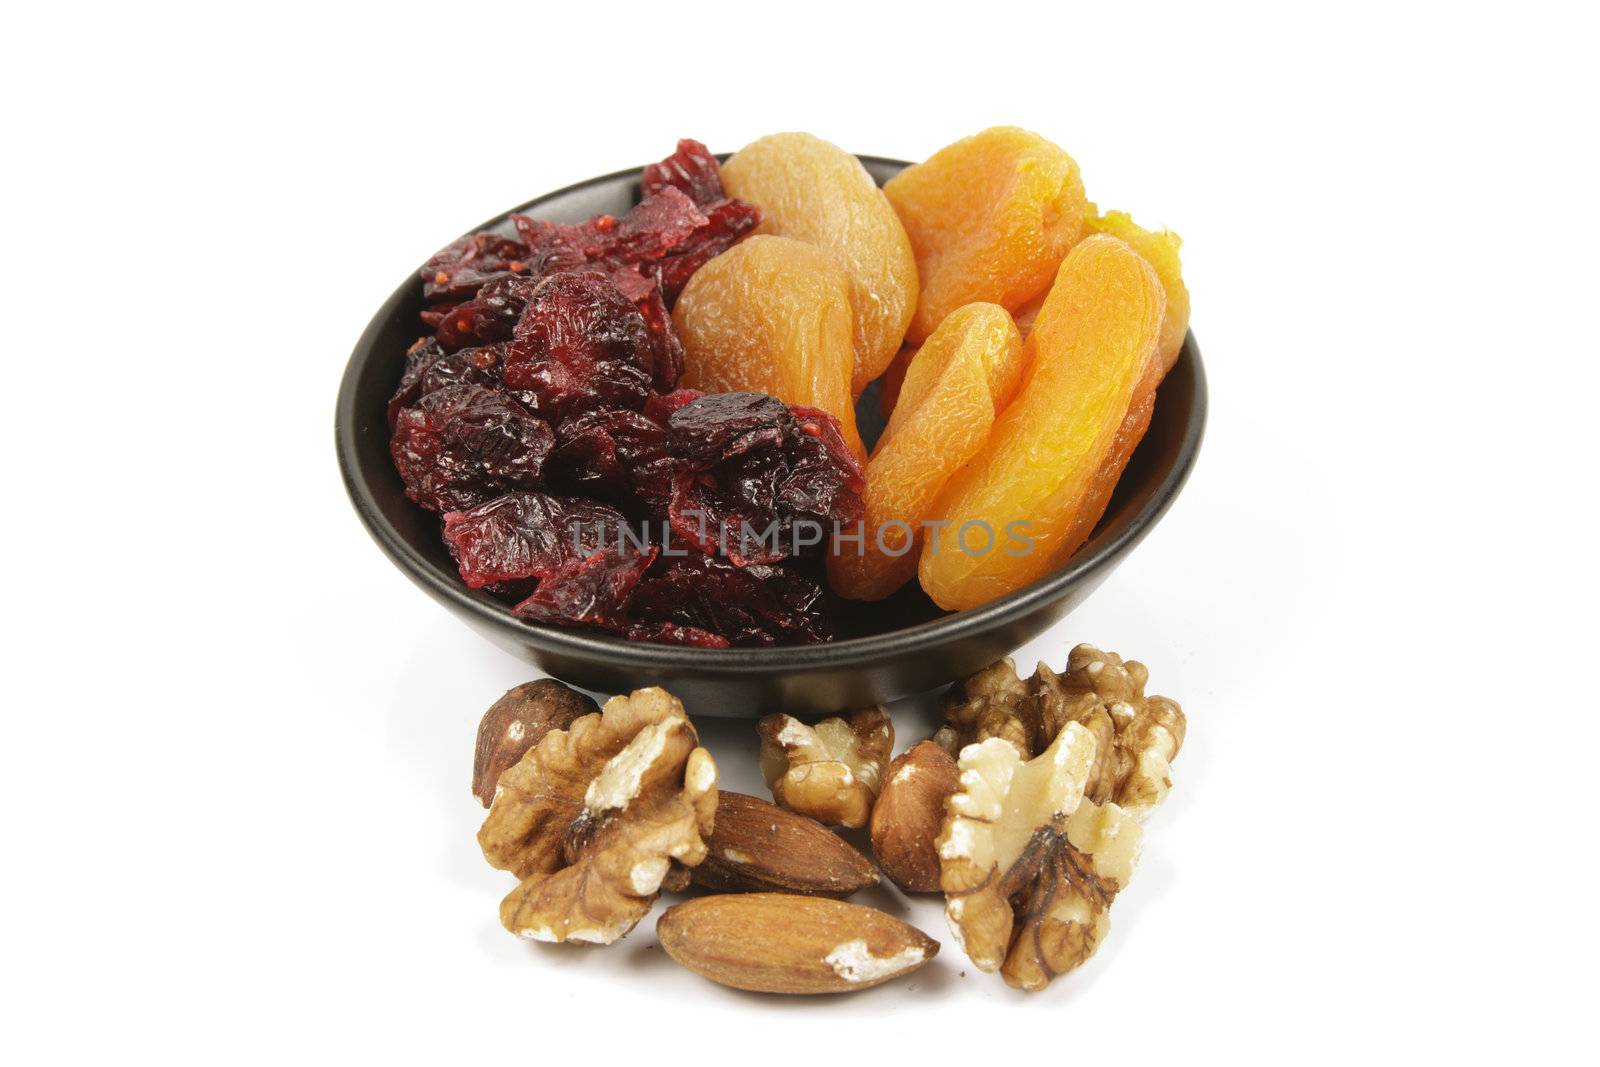 Red ripe dried cranberries and dried orange apricots with mixed nuts on a reflective white background